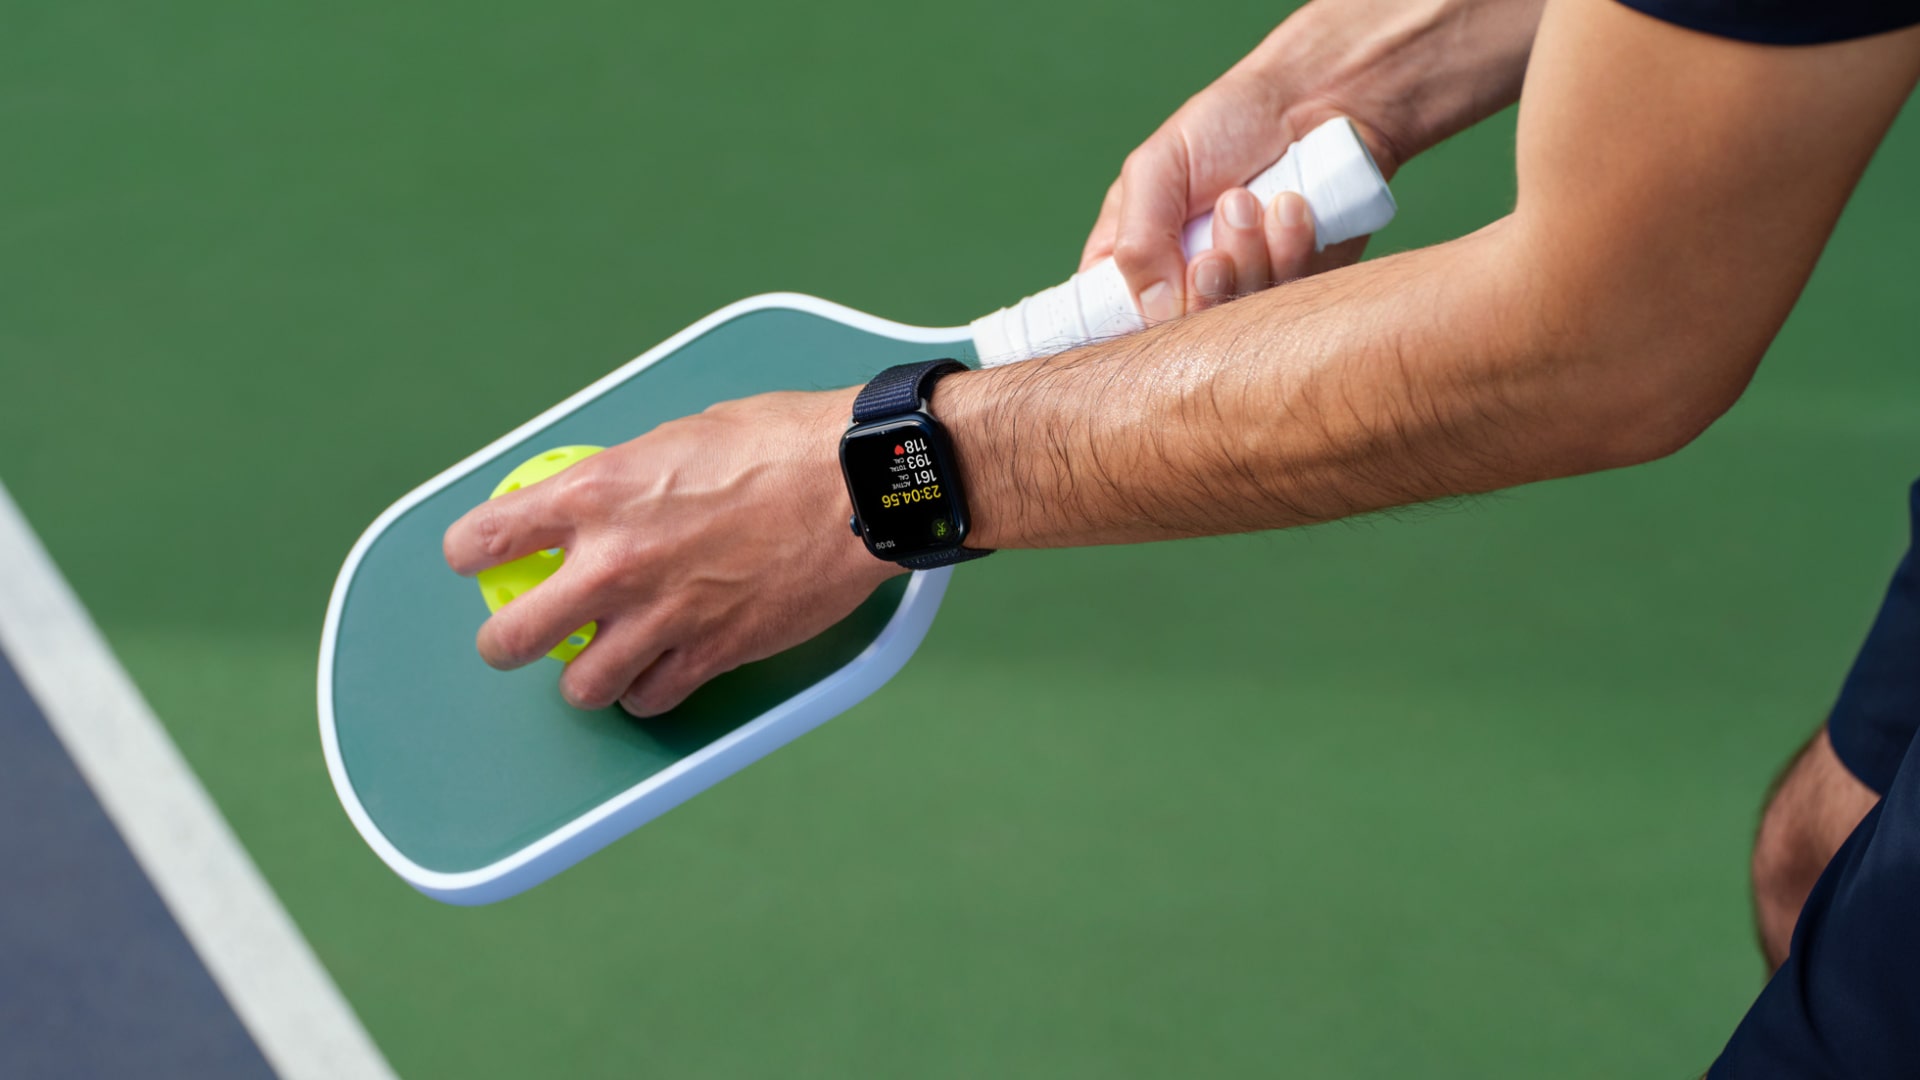 A person tracks a pickleball workout on an Apple Watch.